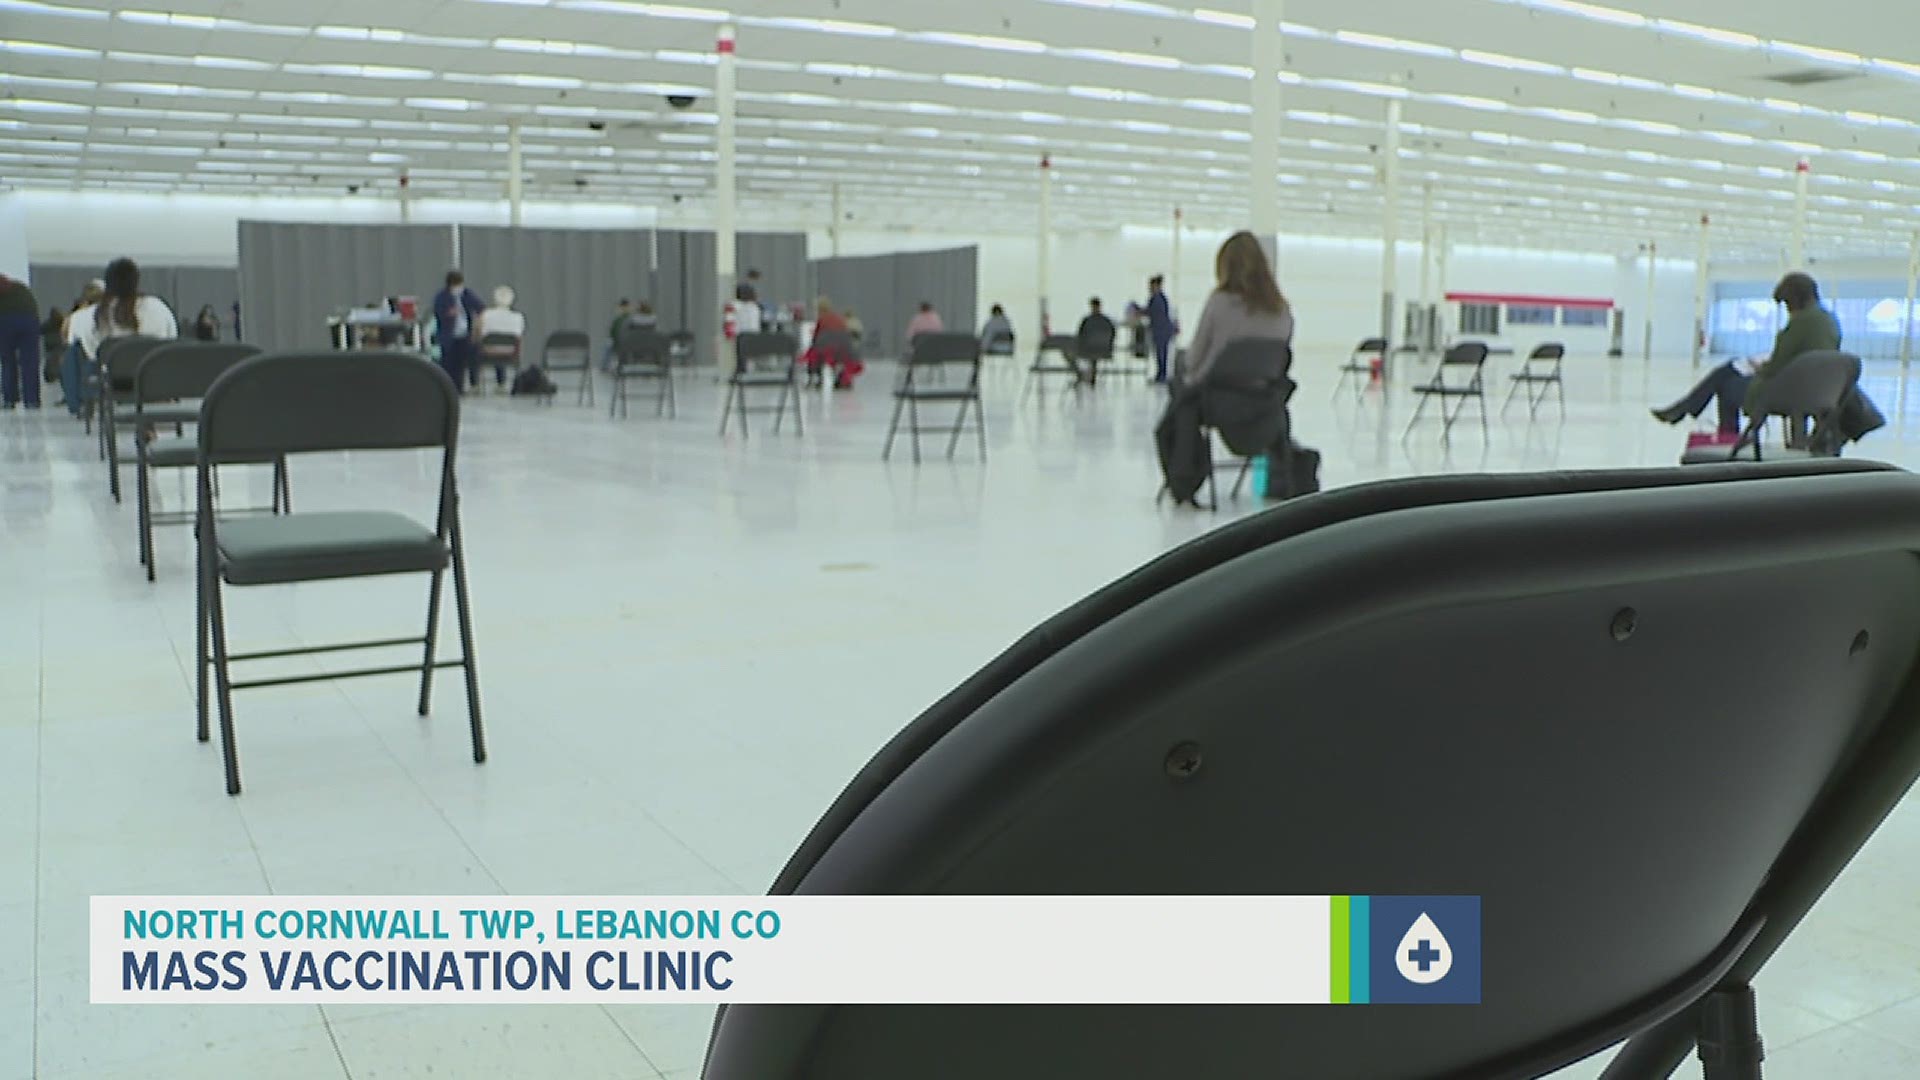 Officials said the clinic could conduct up to 1,000 vaccinations a day.